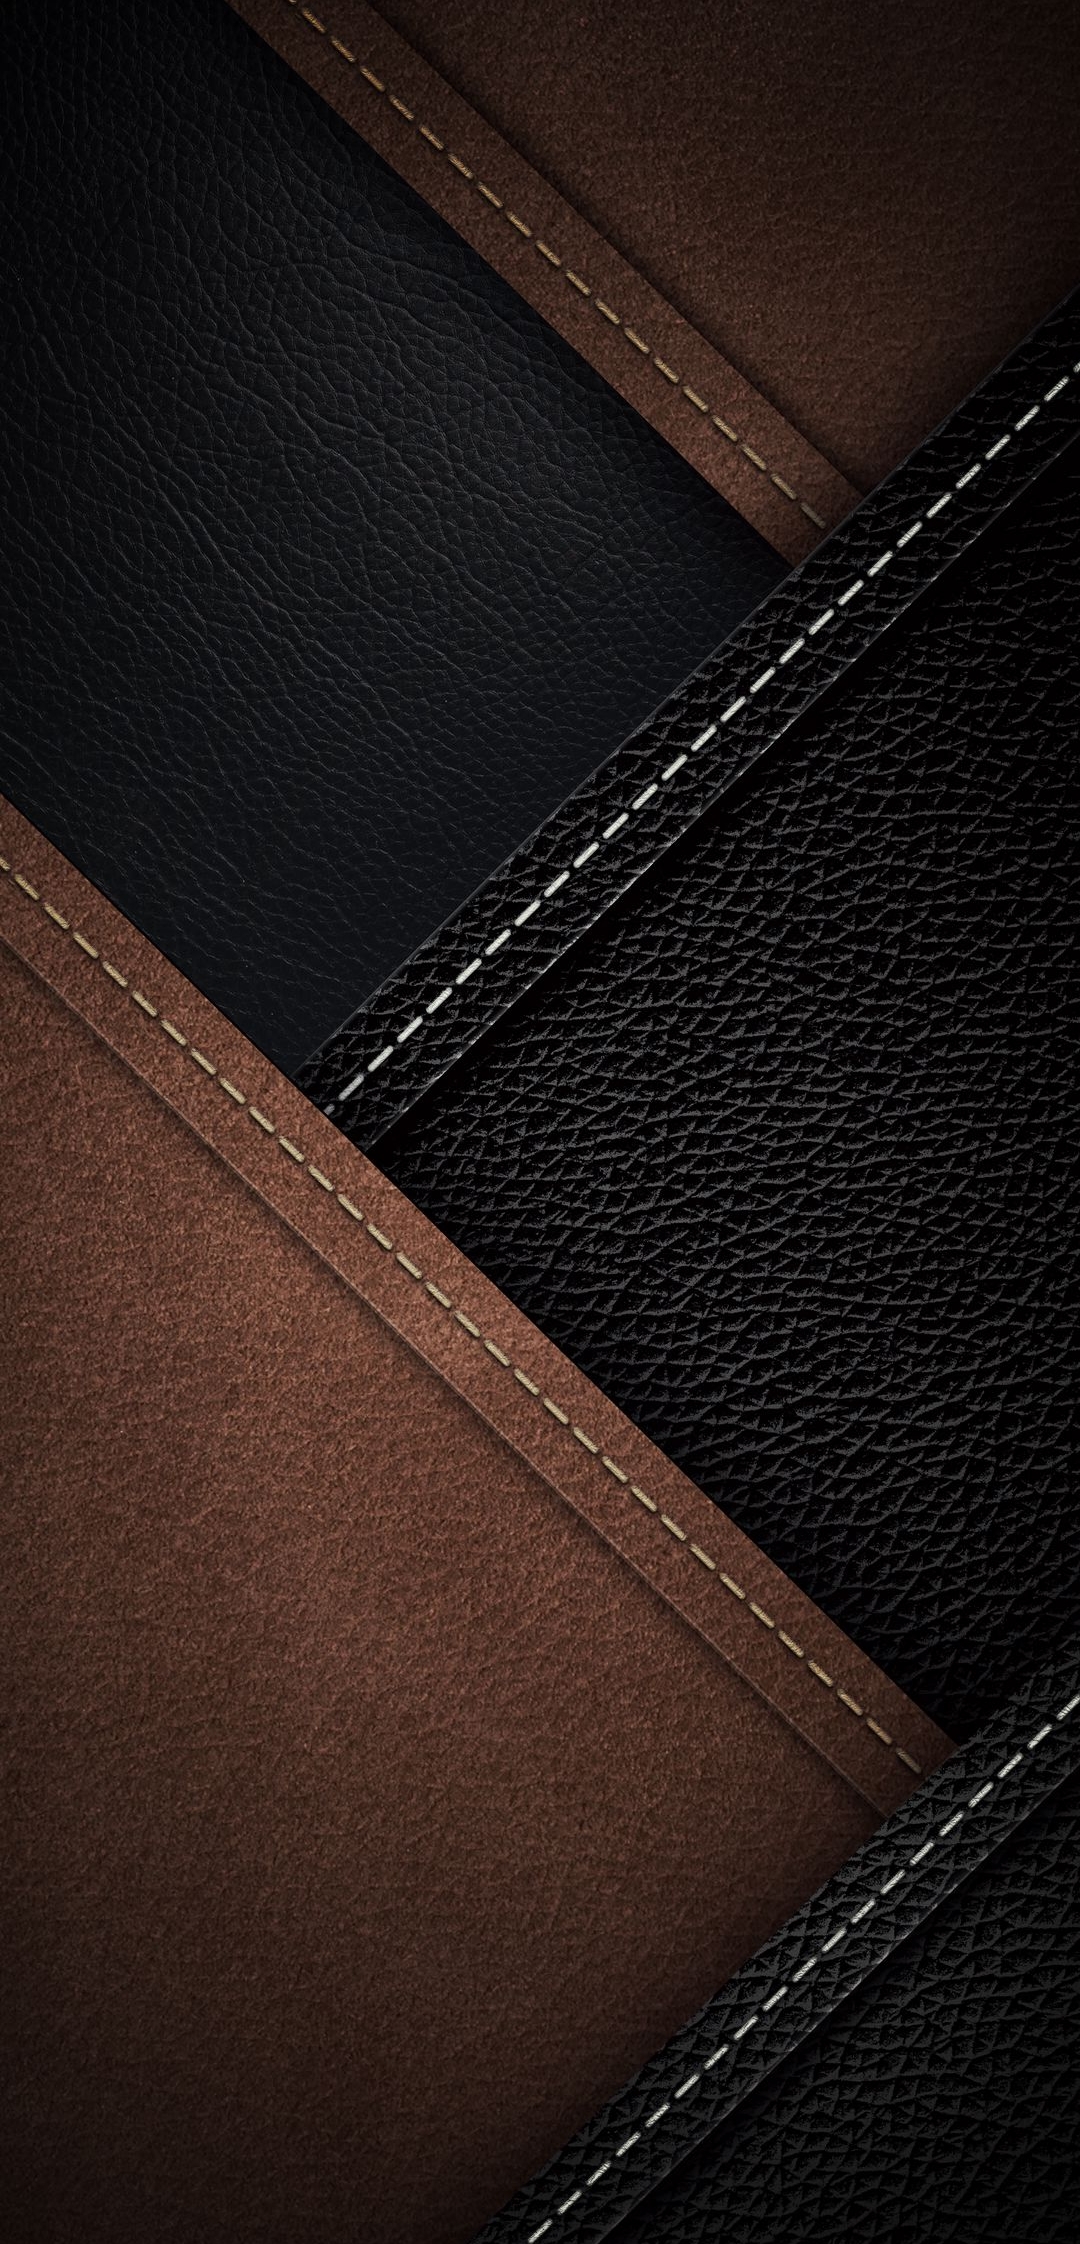 Leather_4k_Hd_Abstruct_HD